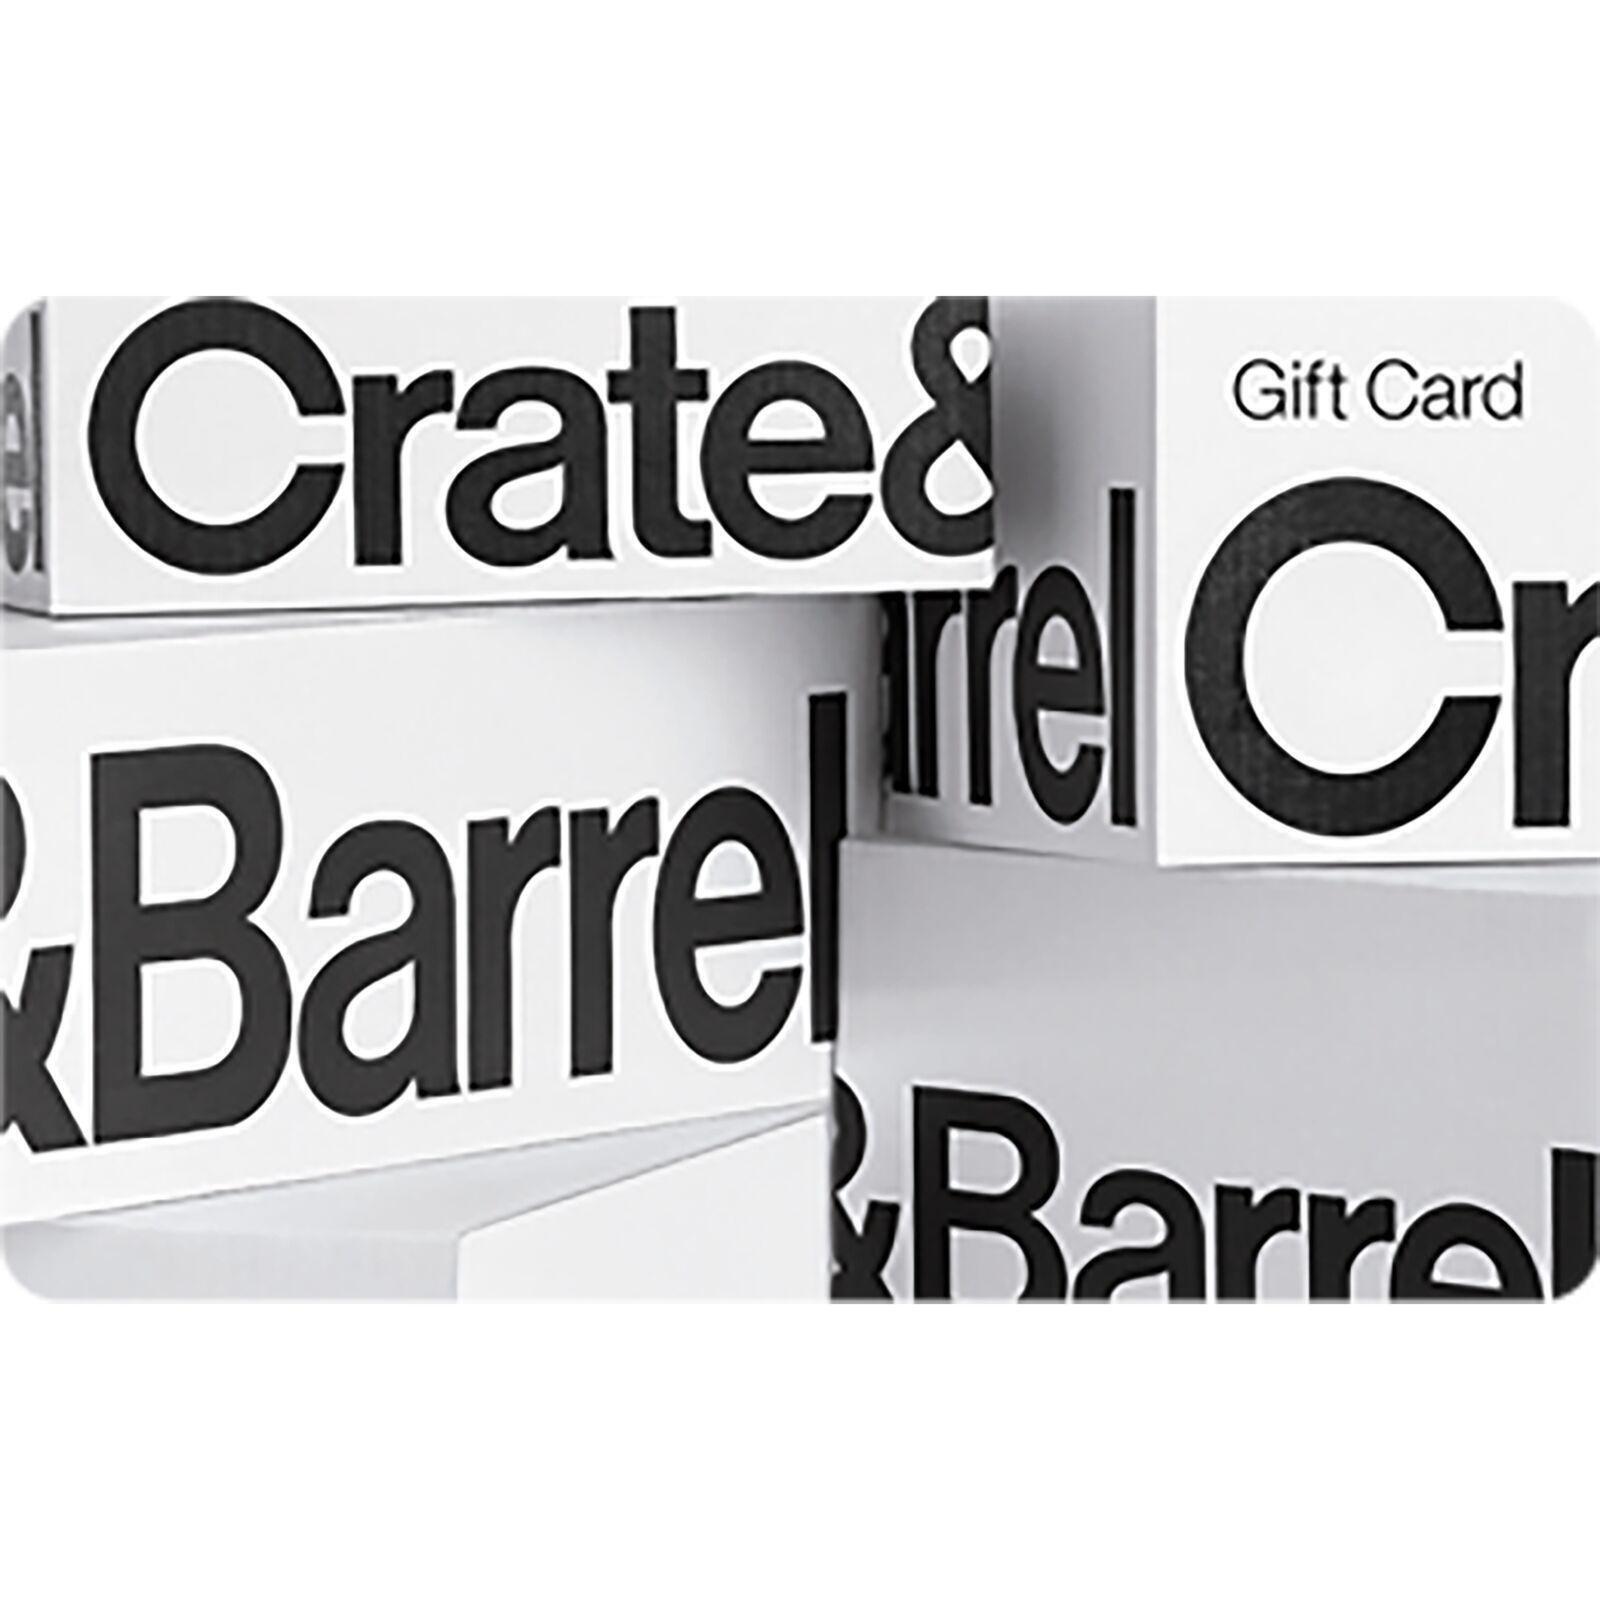 Crate & Barrel eGift Card (Email Delivery)